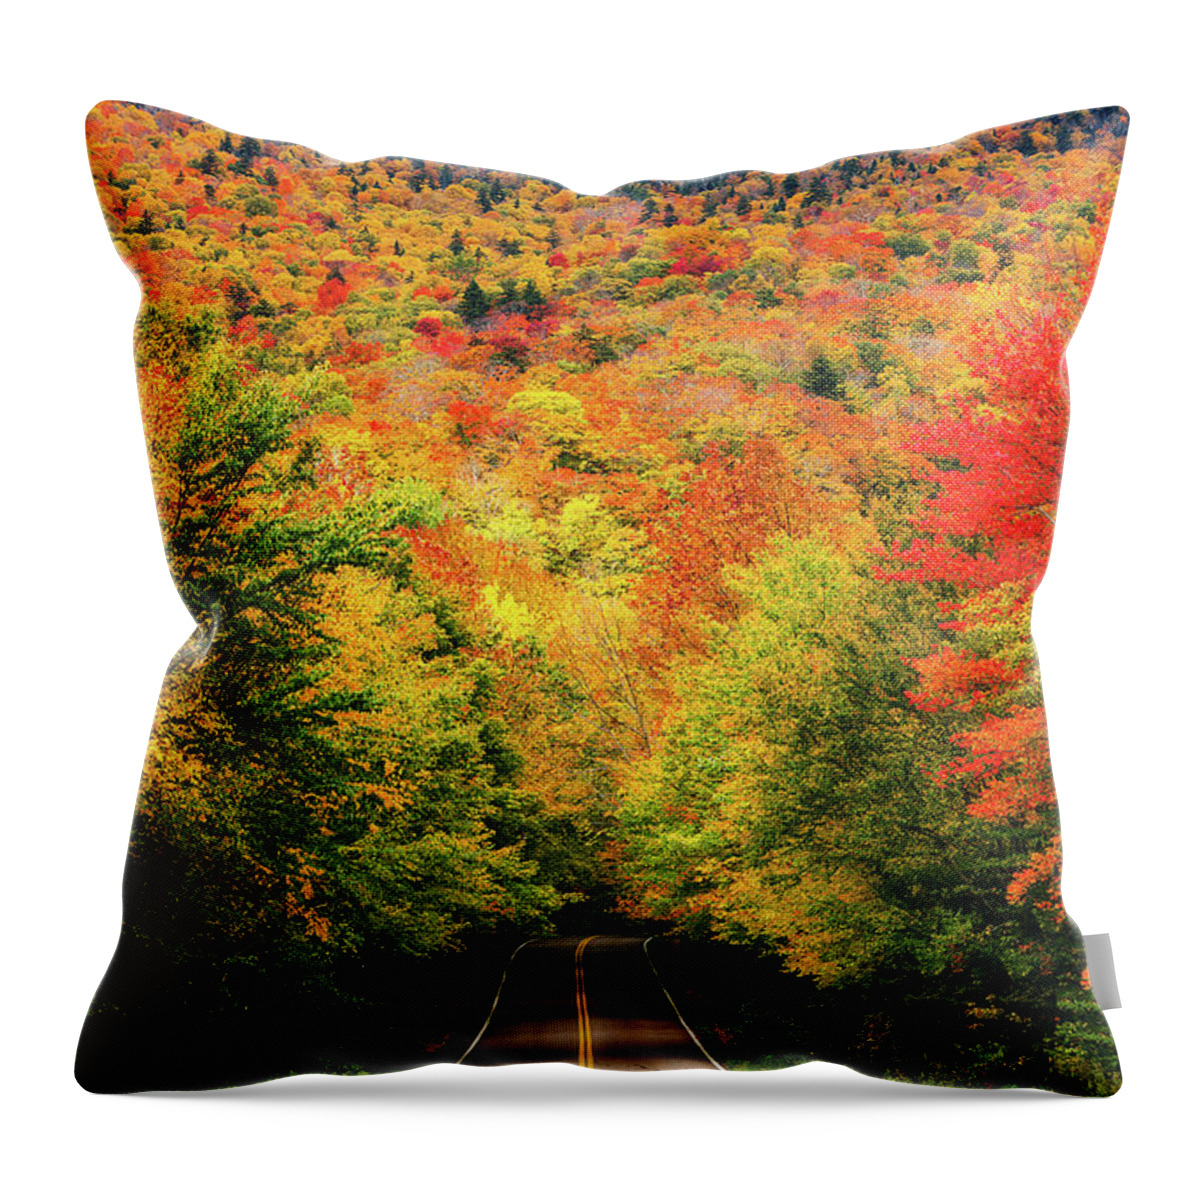 October Throw Pillow featuring the photograph Smuggler's Notch by Robert Clifford